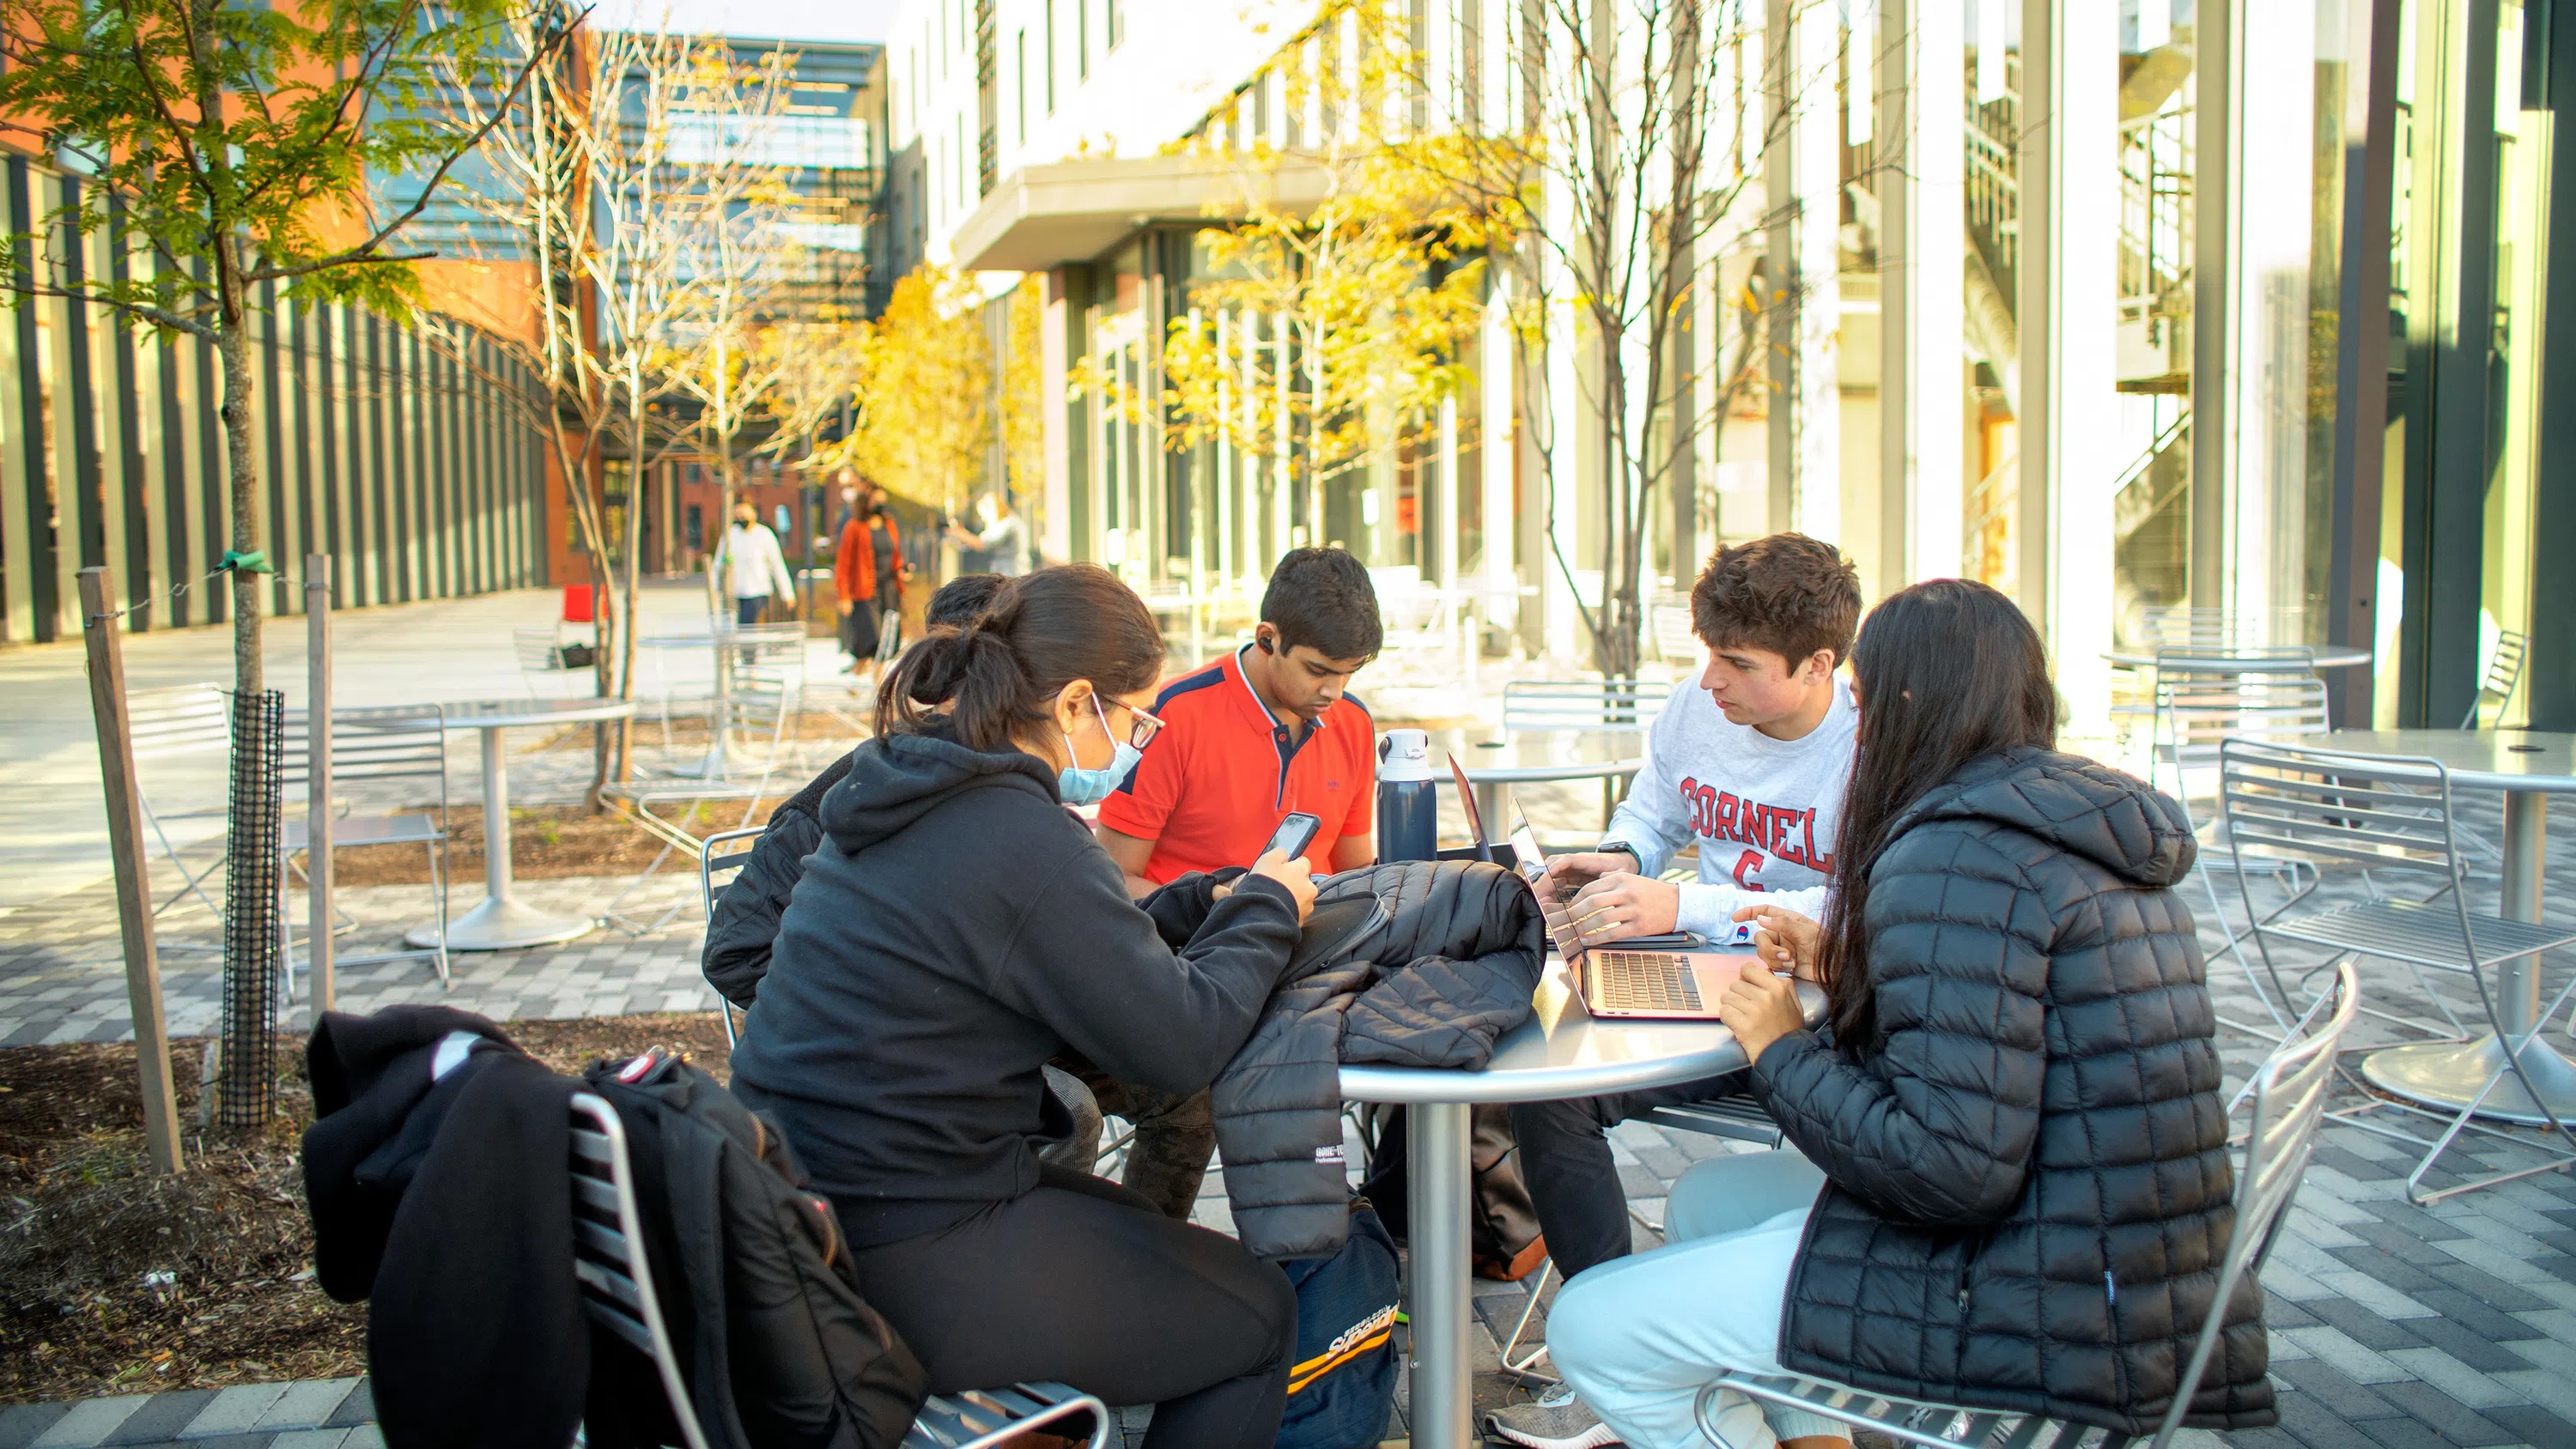 Students hang out in a courtyard adjacent to Toni Morrison Hall.